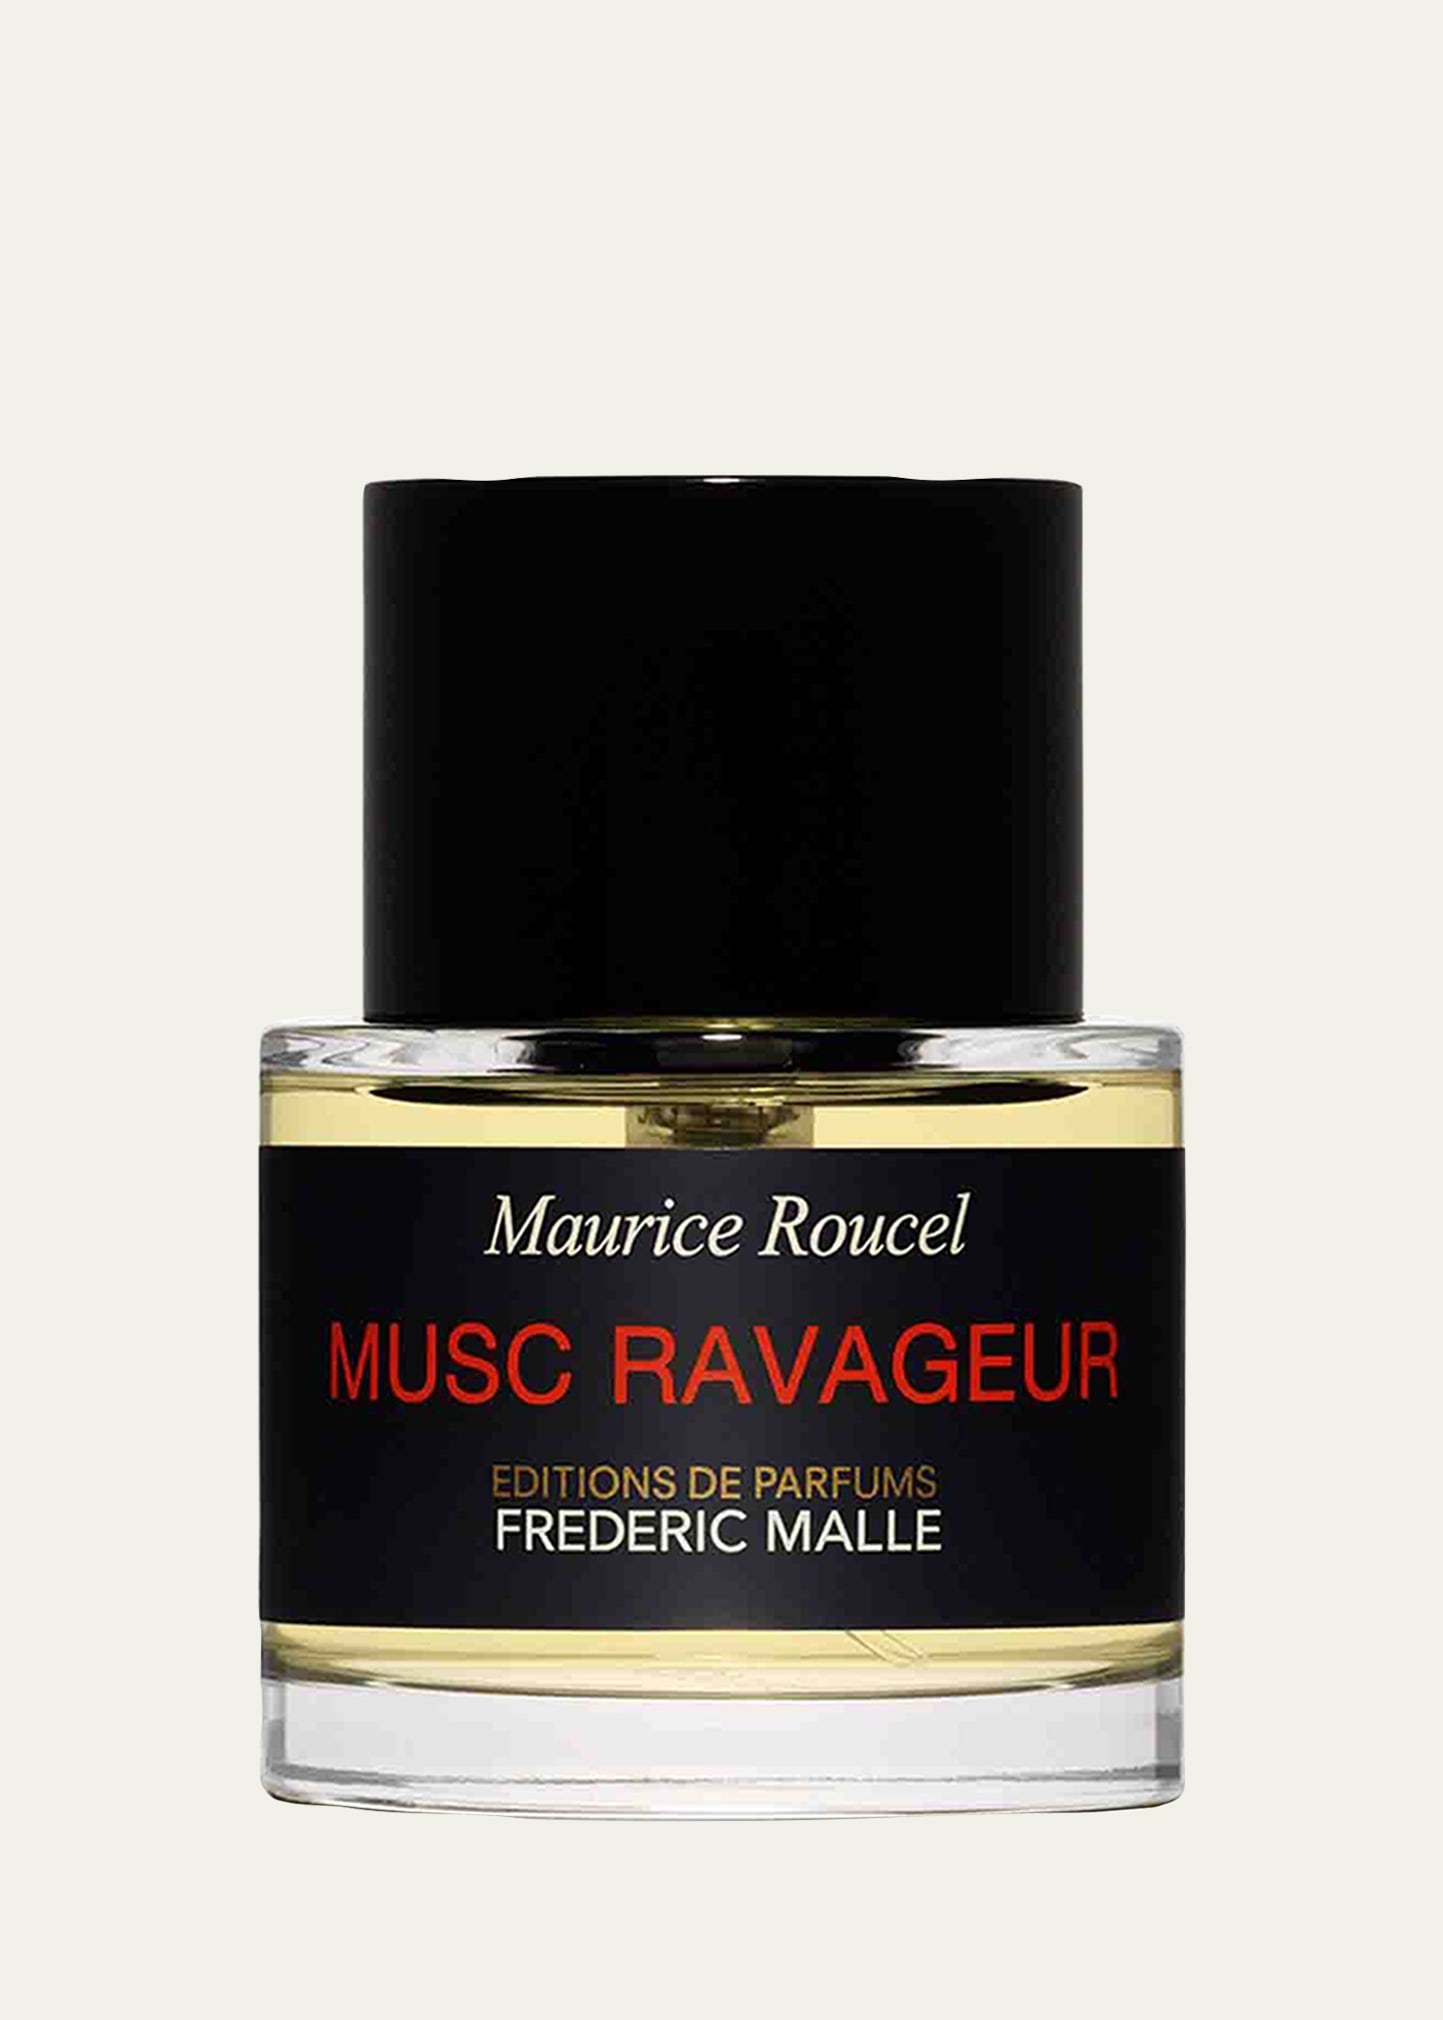 Editions De Parfums Frederic Malle Musc Ravageur Perfume, 1.7 Oz. In White